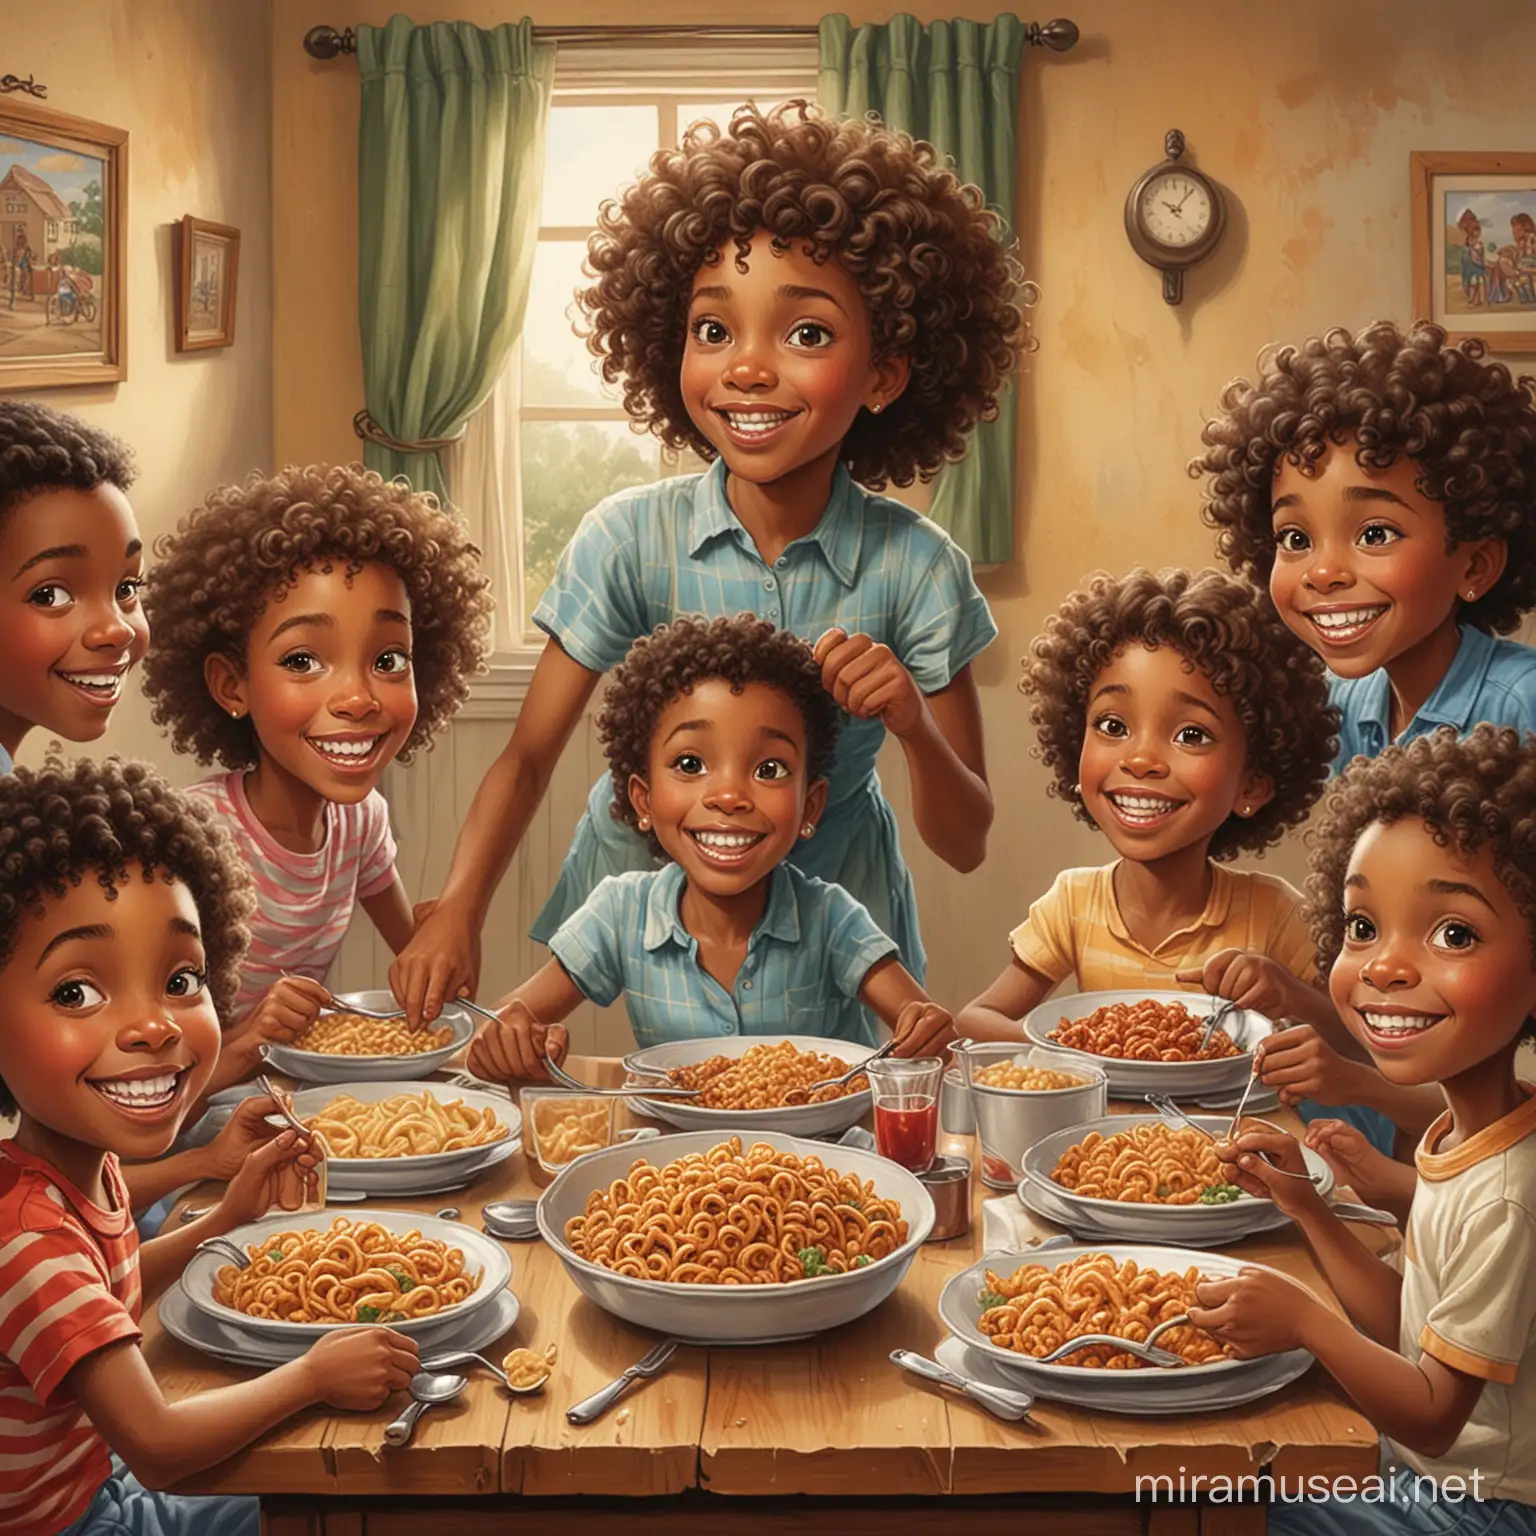 cartoon ernie barnes style african american nine 10 year old children with curly hair smiling eating food with friends in a room (not home)